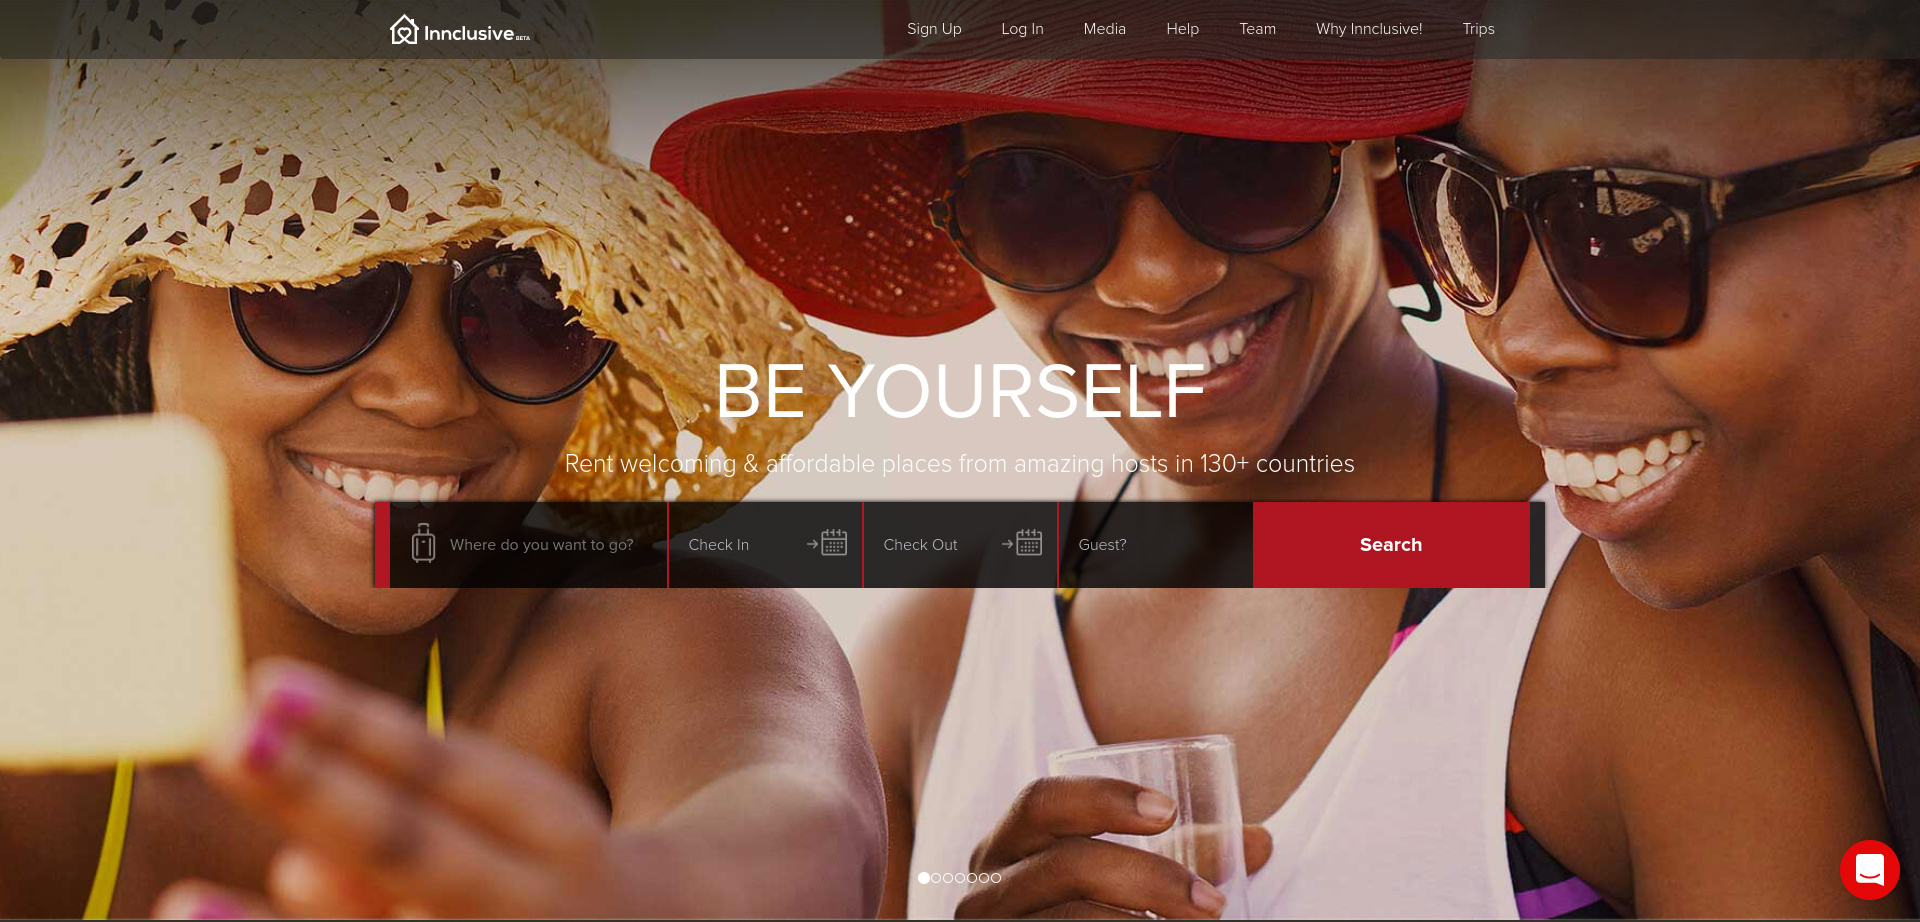 Screenshot of the Innclusive homepage - an airbnb competitor